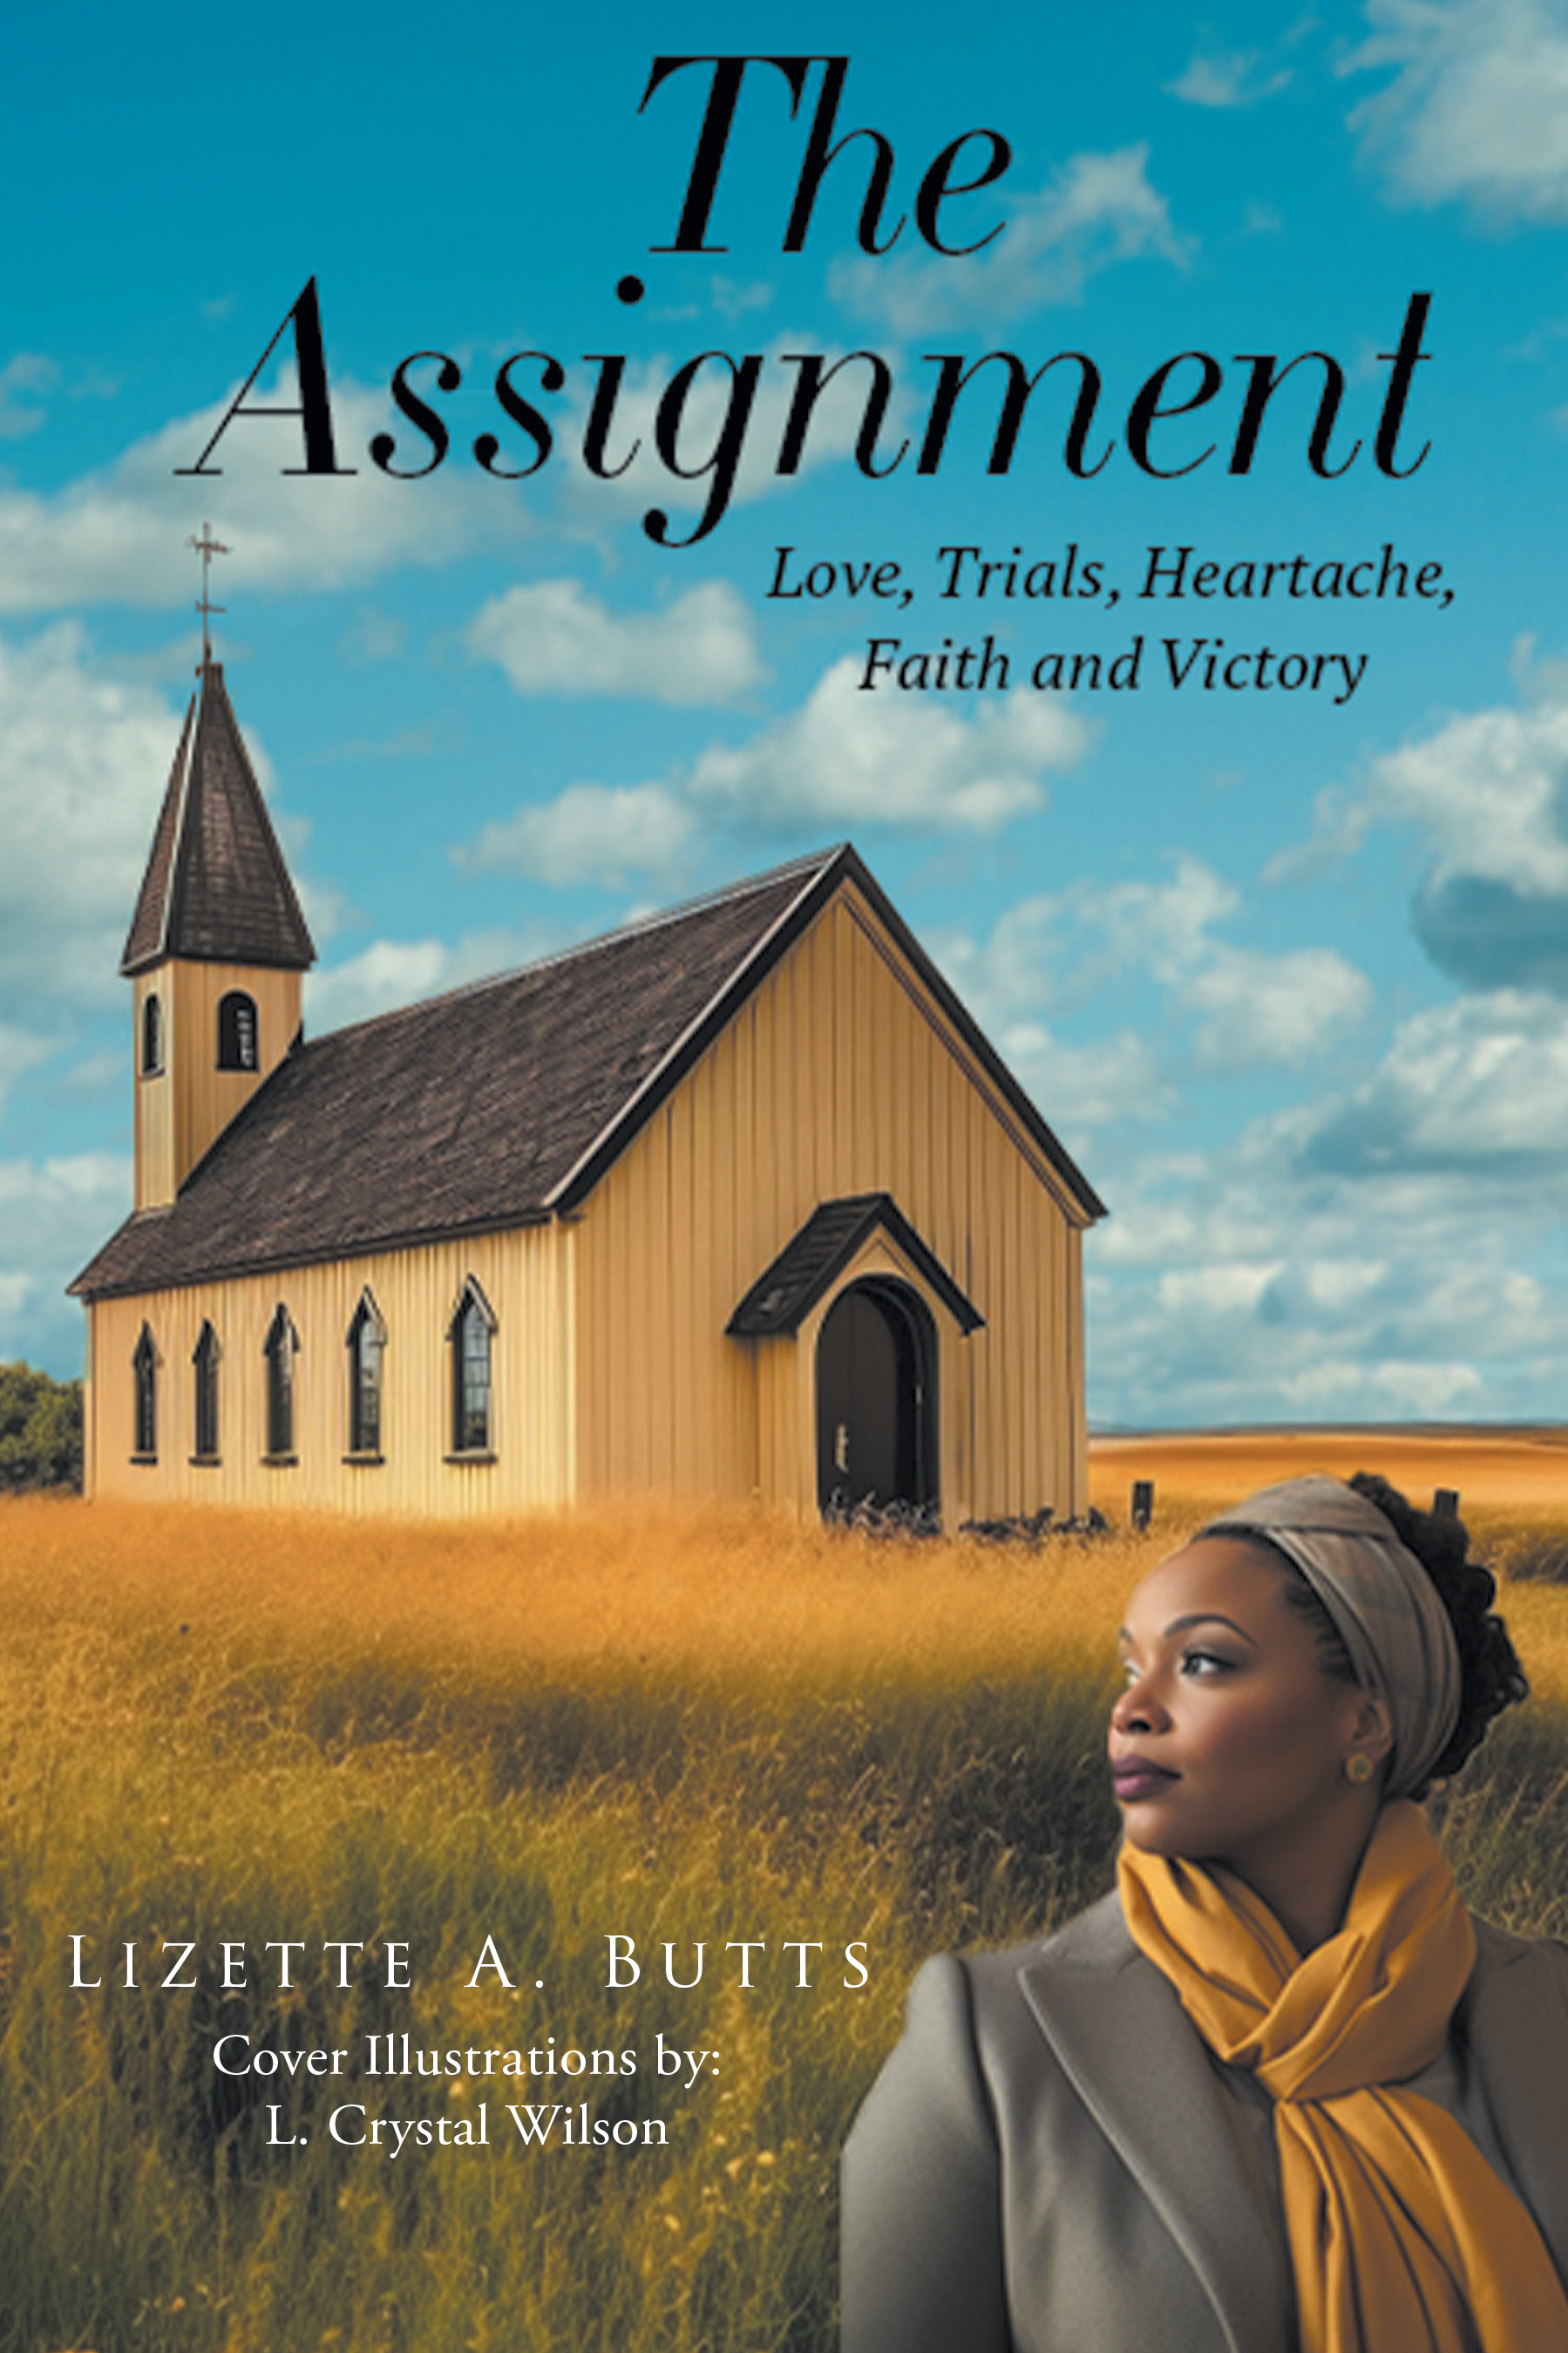 Lizette A. Butts’s Newly Released “The Assignment: Love, Trials, Heartache, Faith and Victory” is a Riveting Tale of Faith and Perseverance